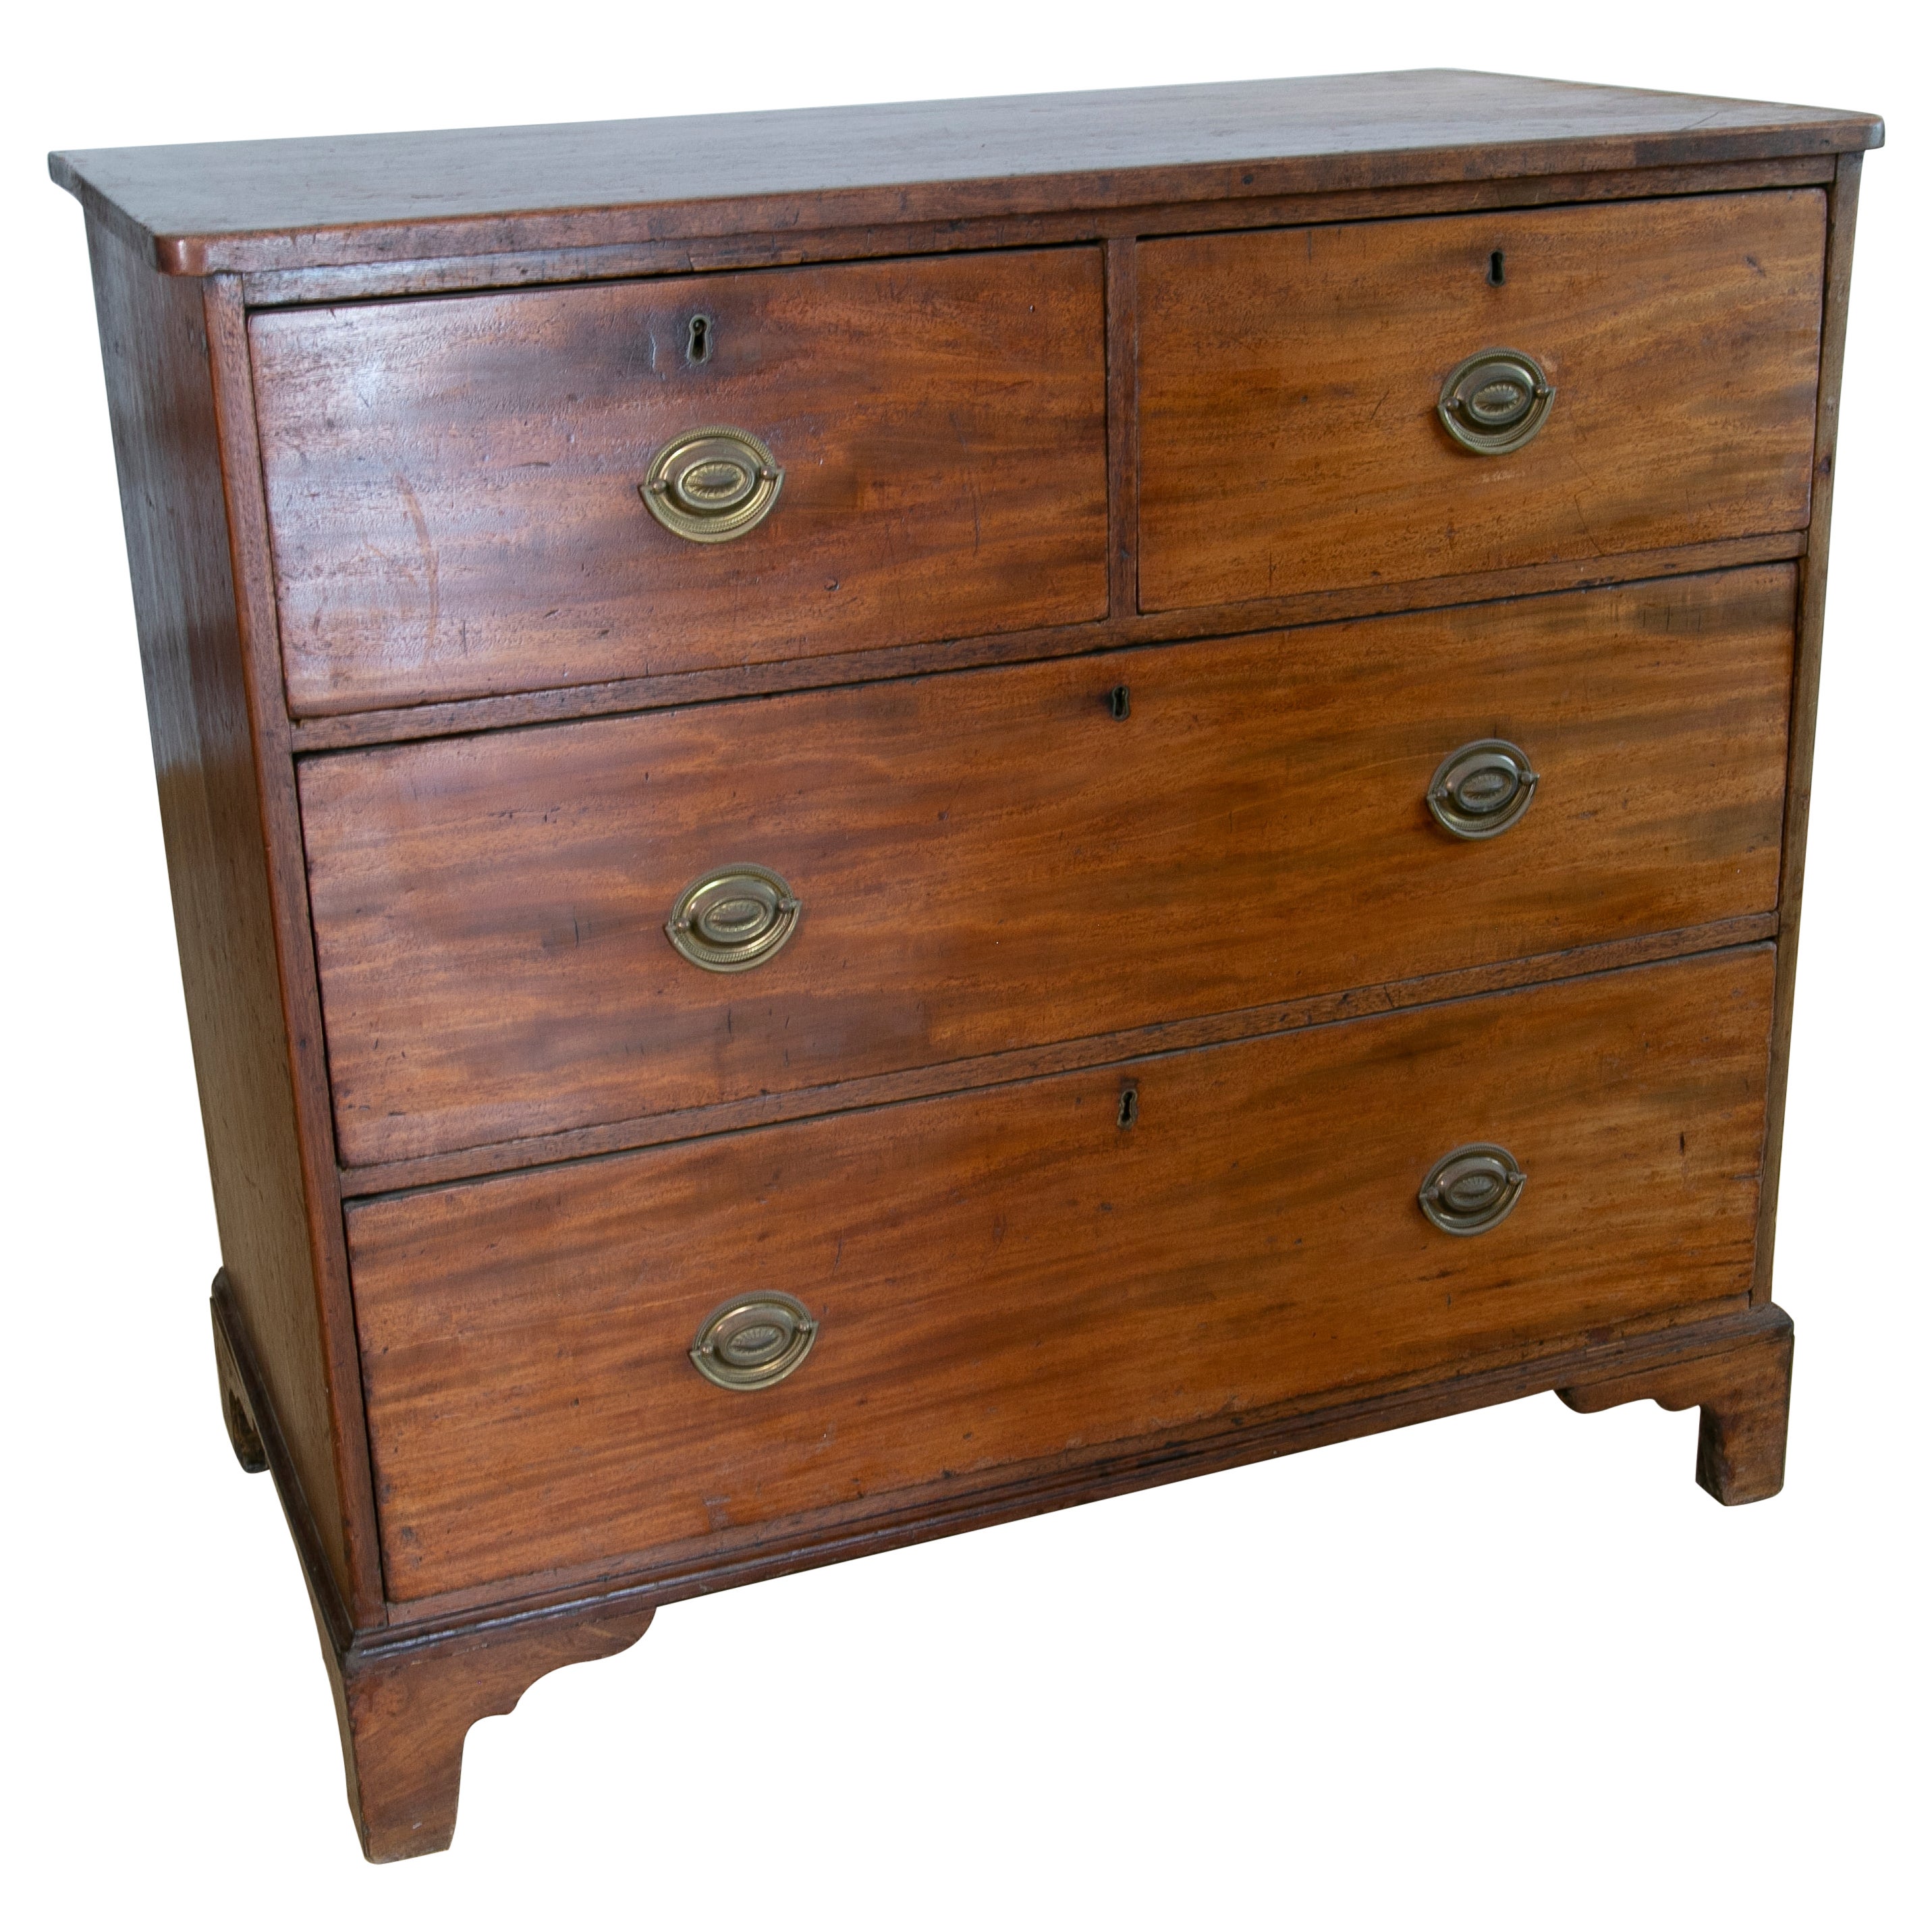 Spanish Wooden Chest of Drawers with Four Drawers and Gilded Metal Pulls